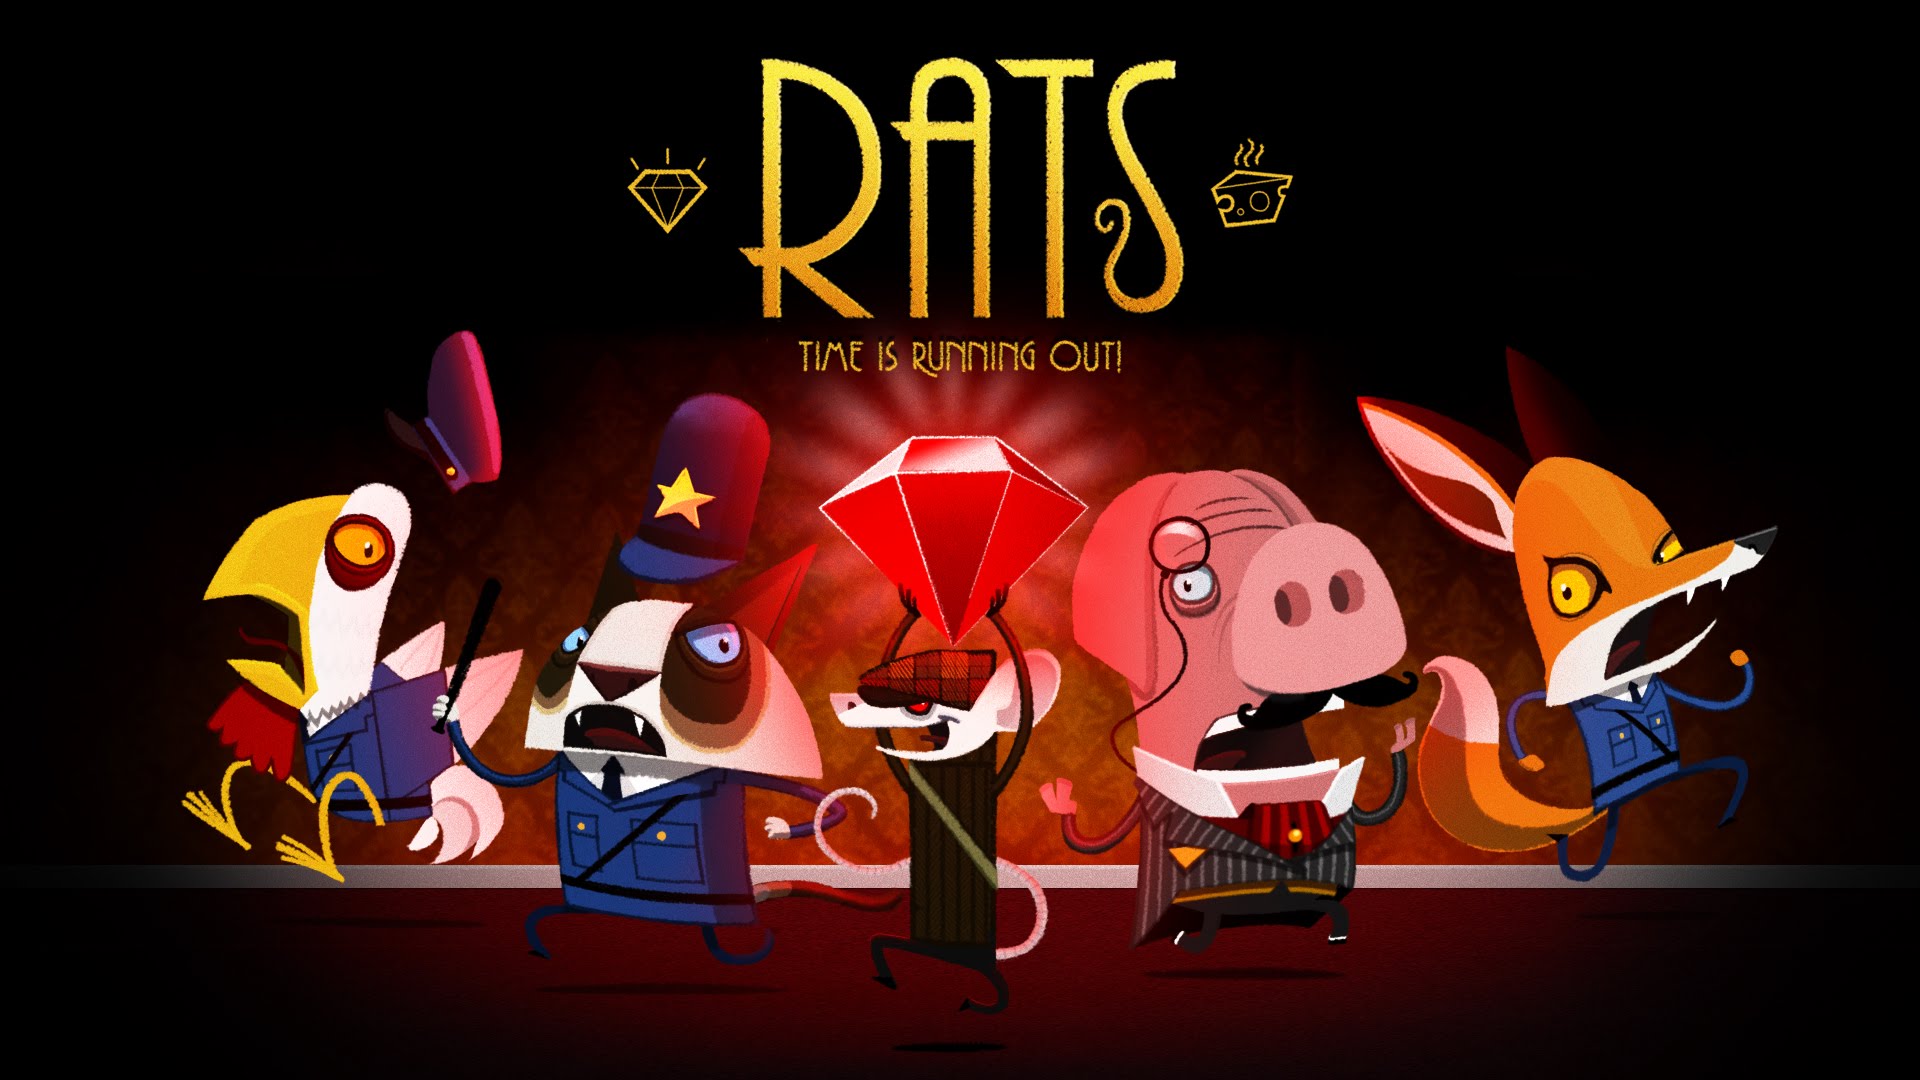 Rats - Time Is Running Out! HD wallpapers, Desktop wallpaper - most viewed